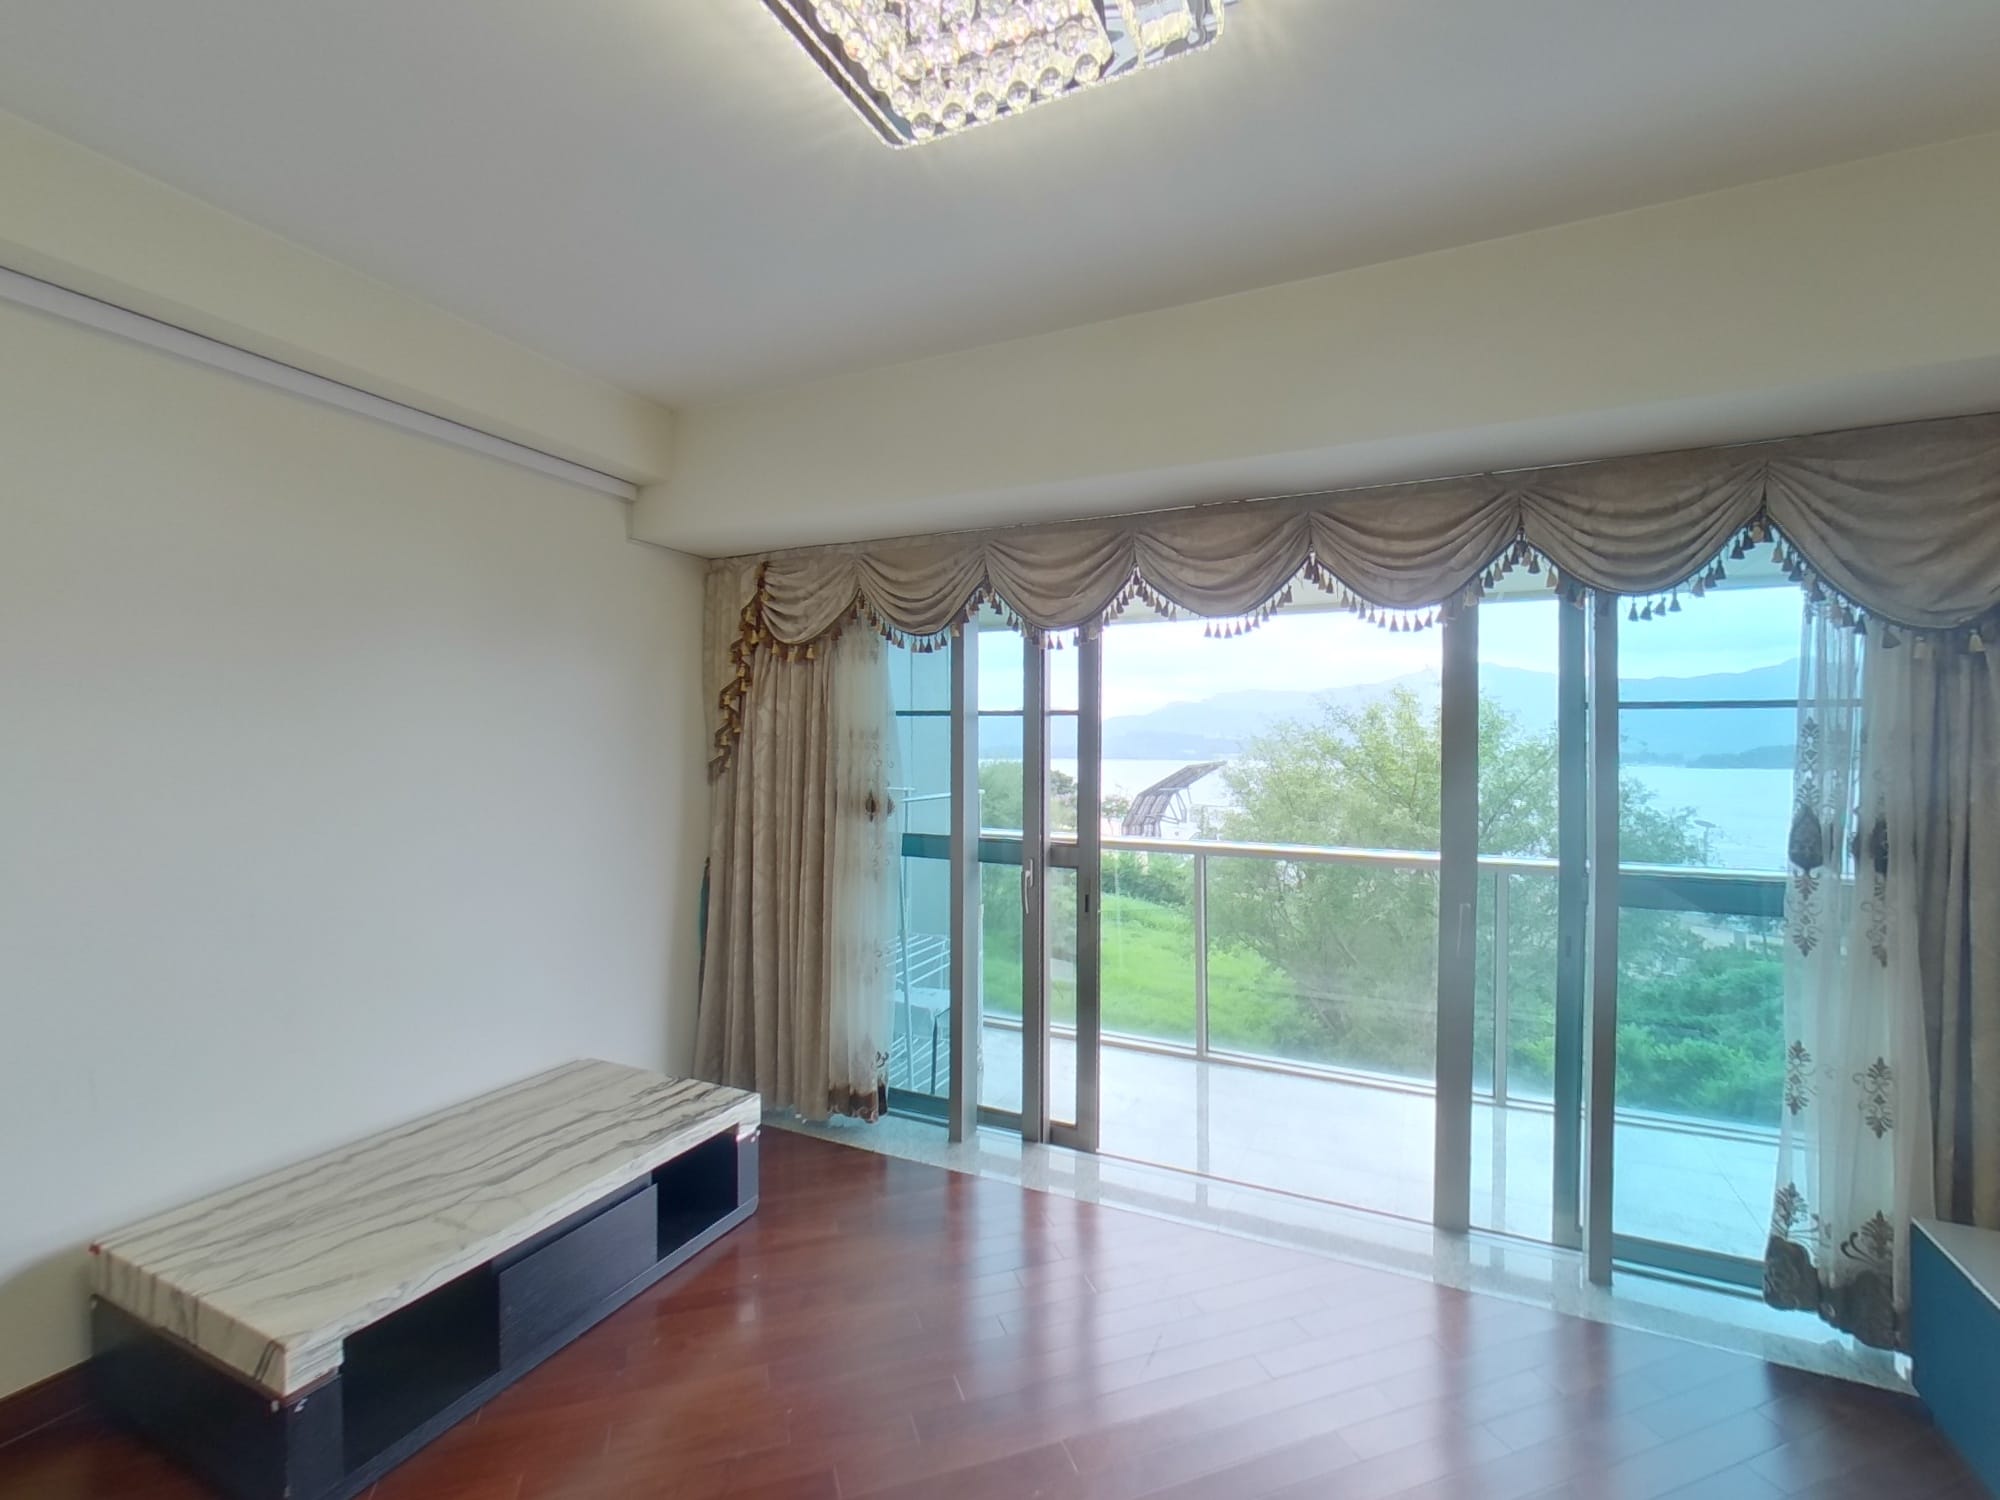 MAYFAIR BY THE SEA II TWR 06 Tai Po 1508286 For Buy